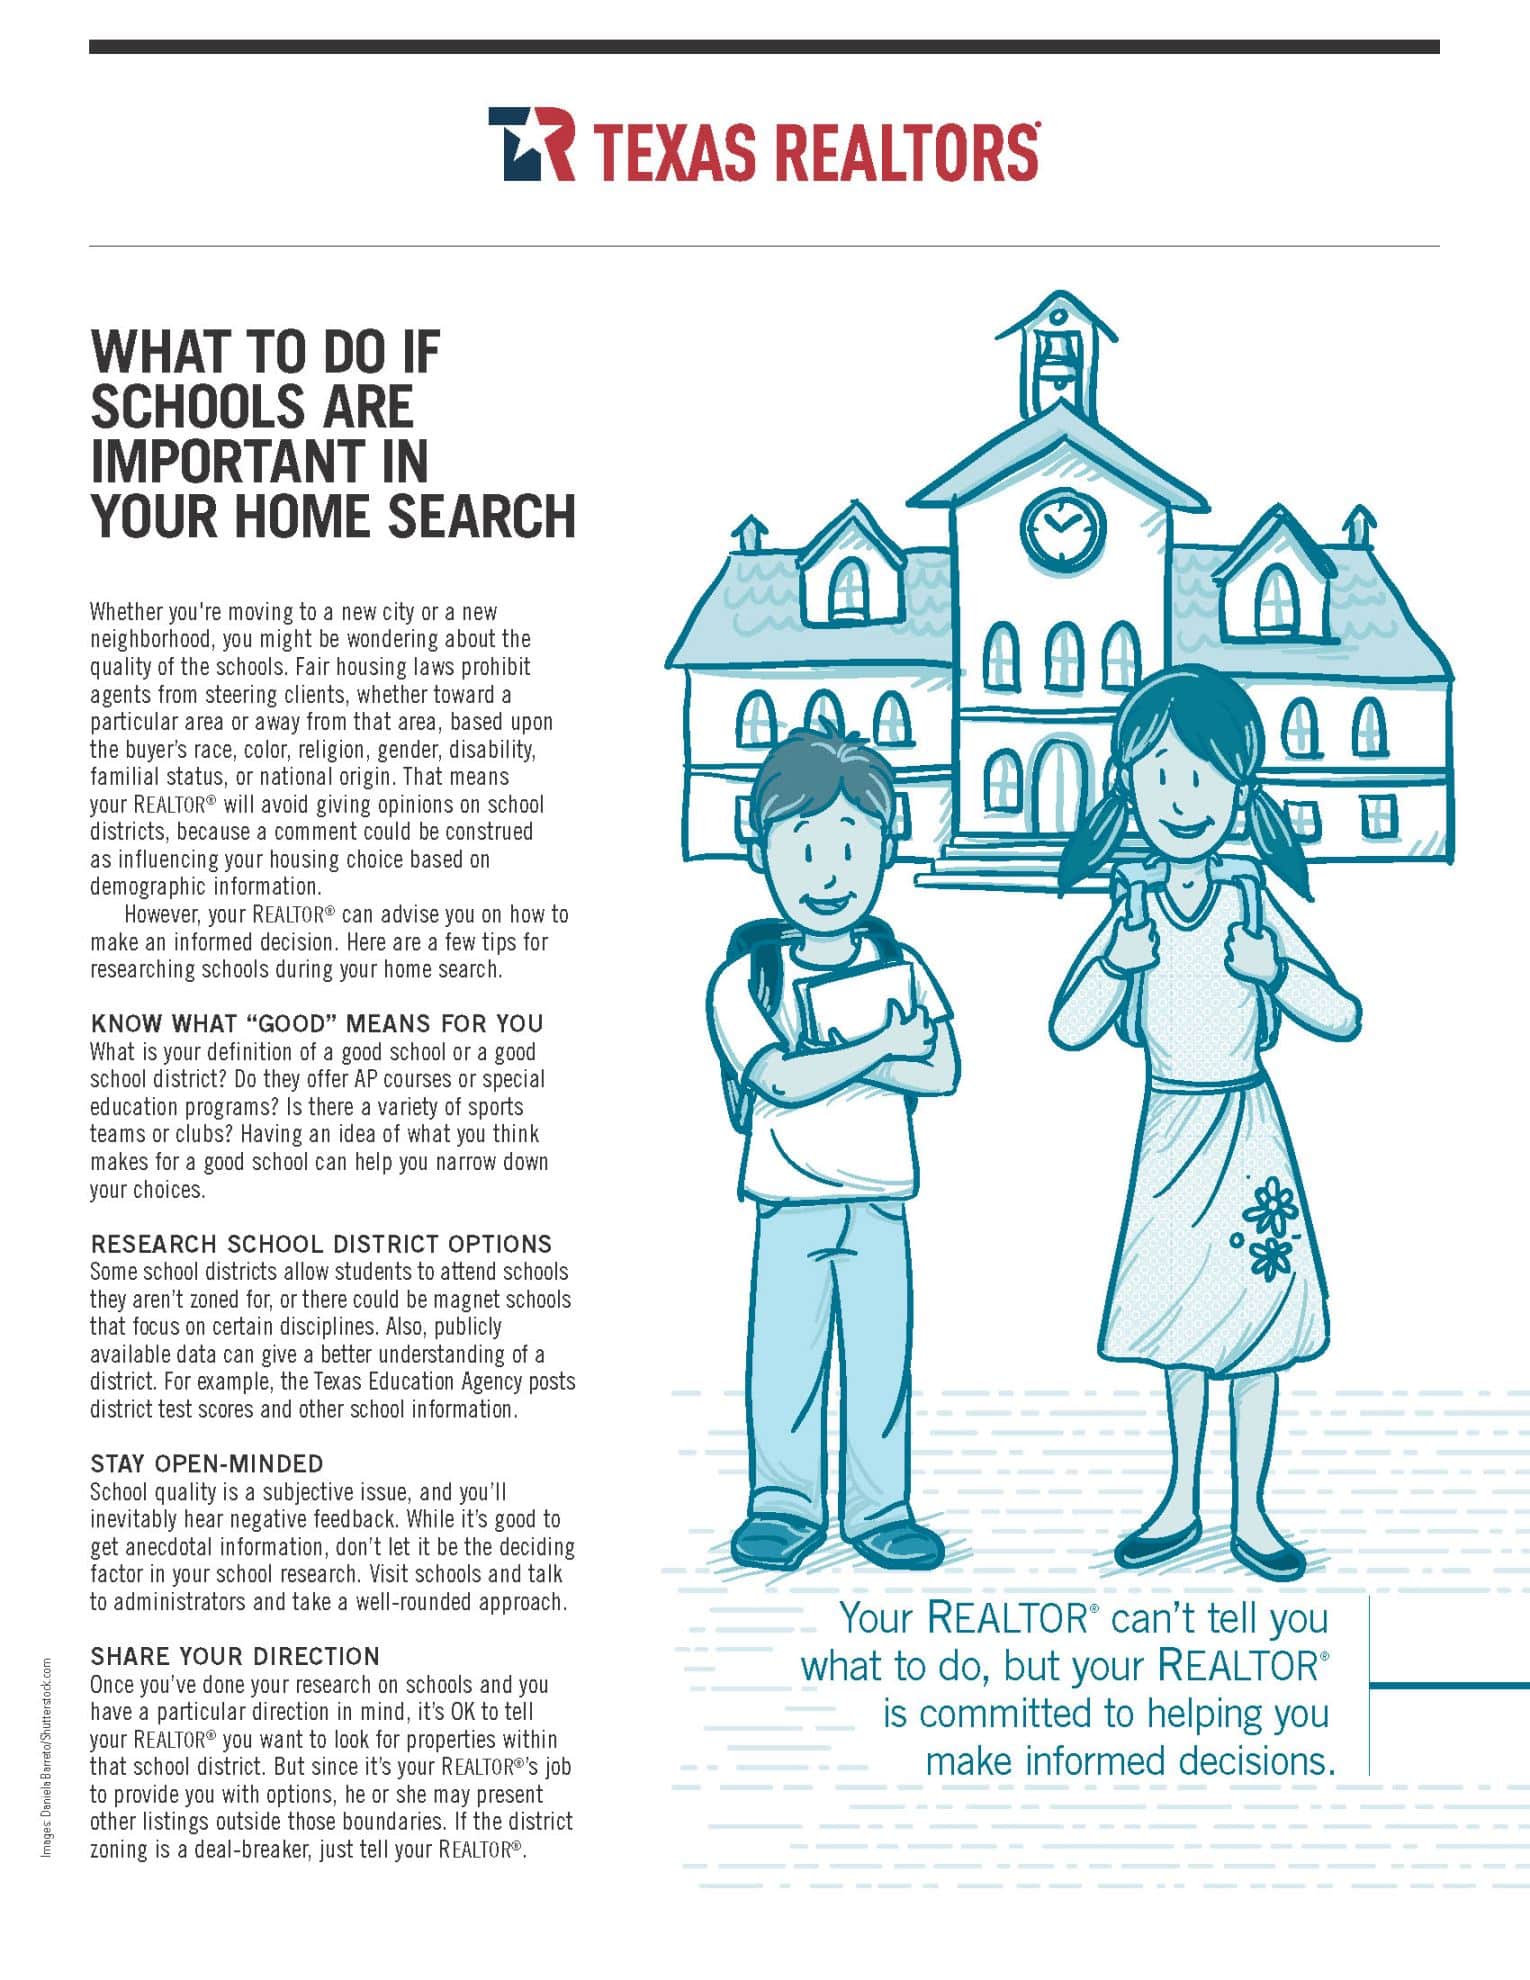 What To Do If Schools Are Important In Your Home Search